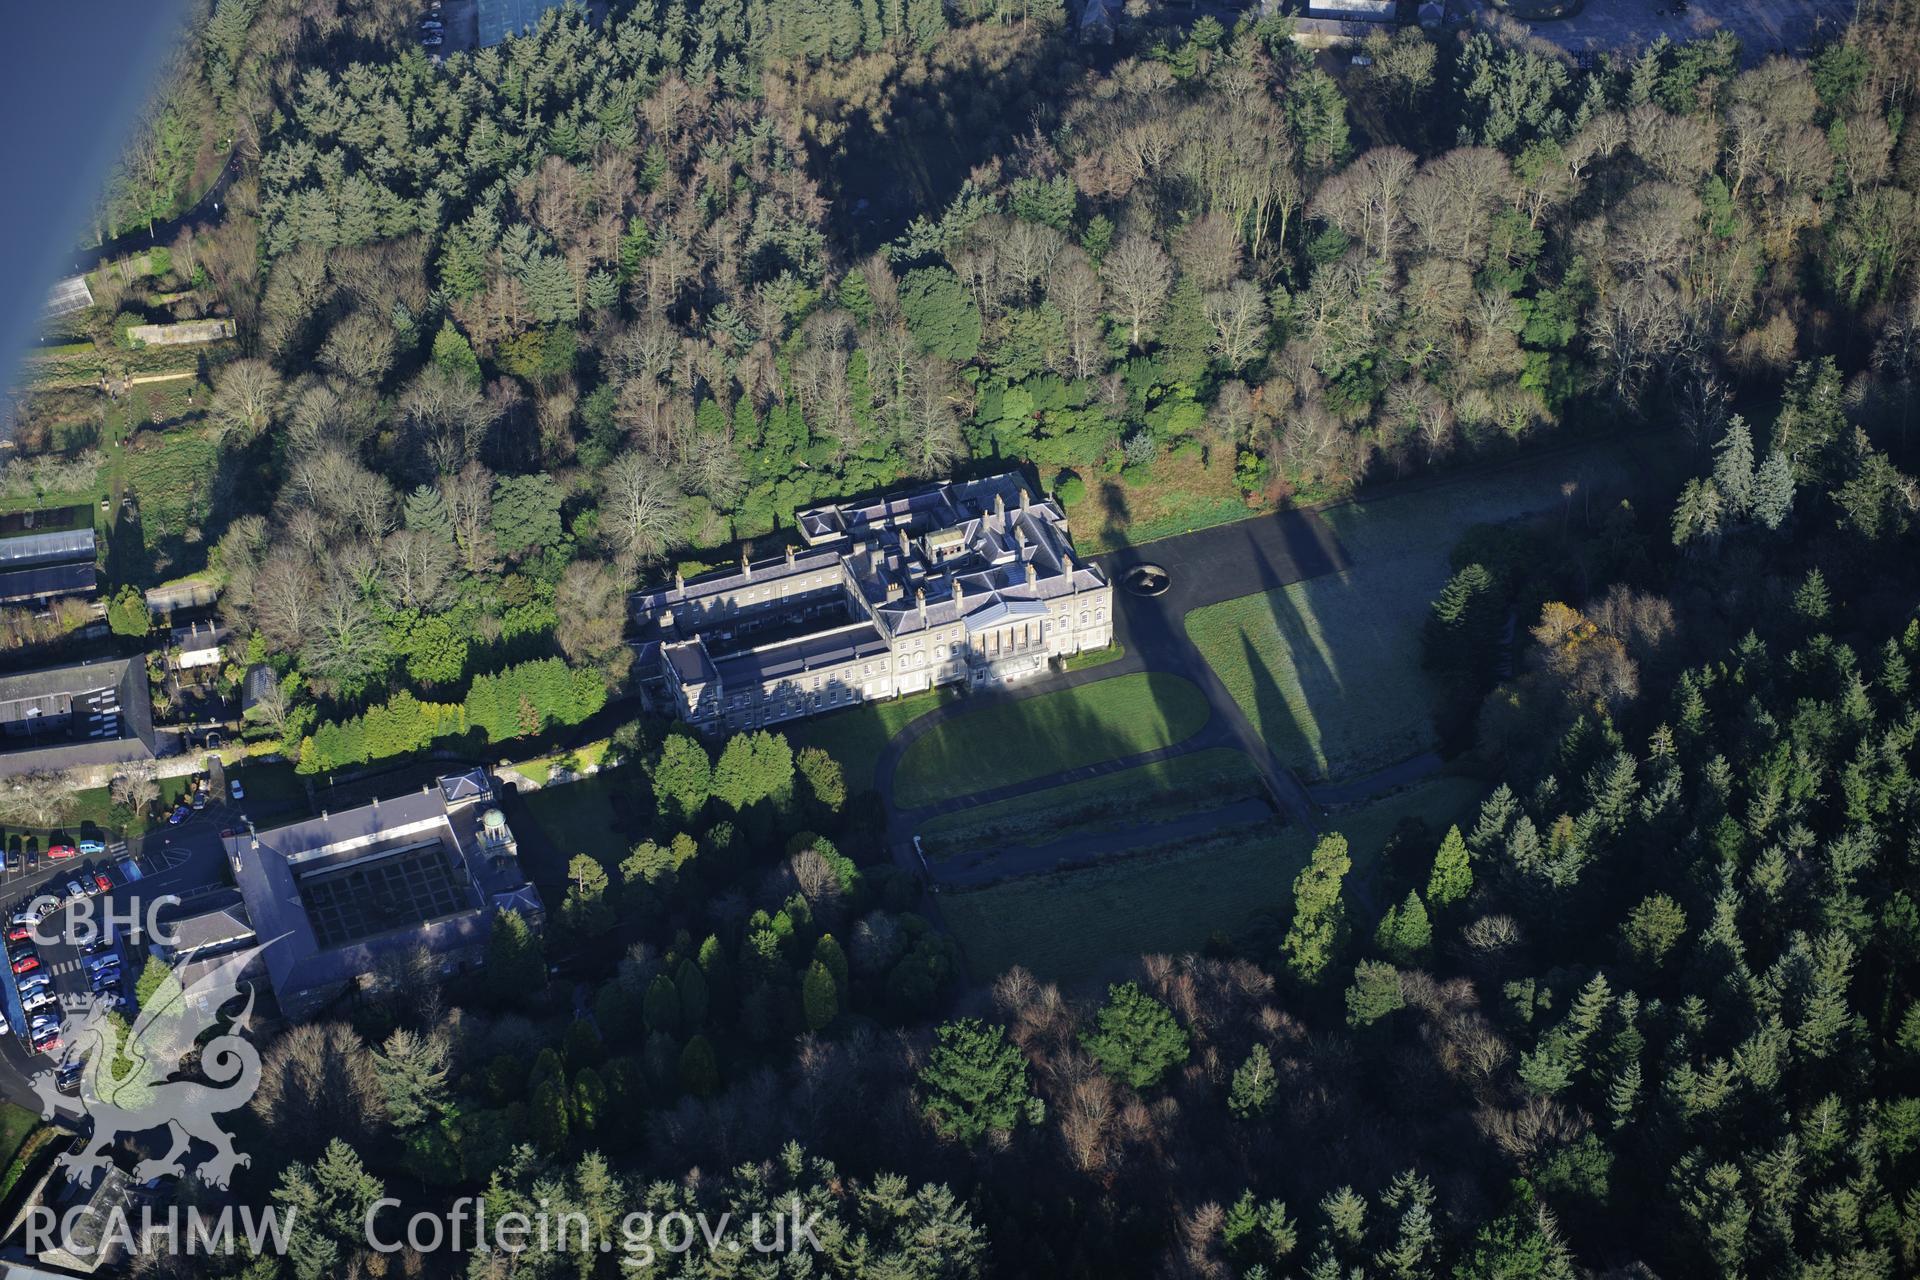 RCAHMW colour oblique photograph of Glynllifon mansion, in winter sunlight. Taken by Toby Driver on 10/12/2012.